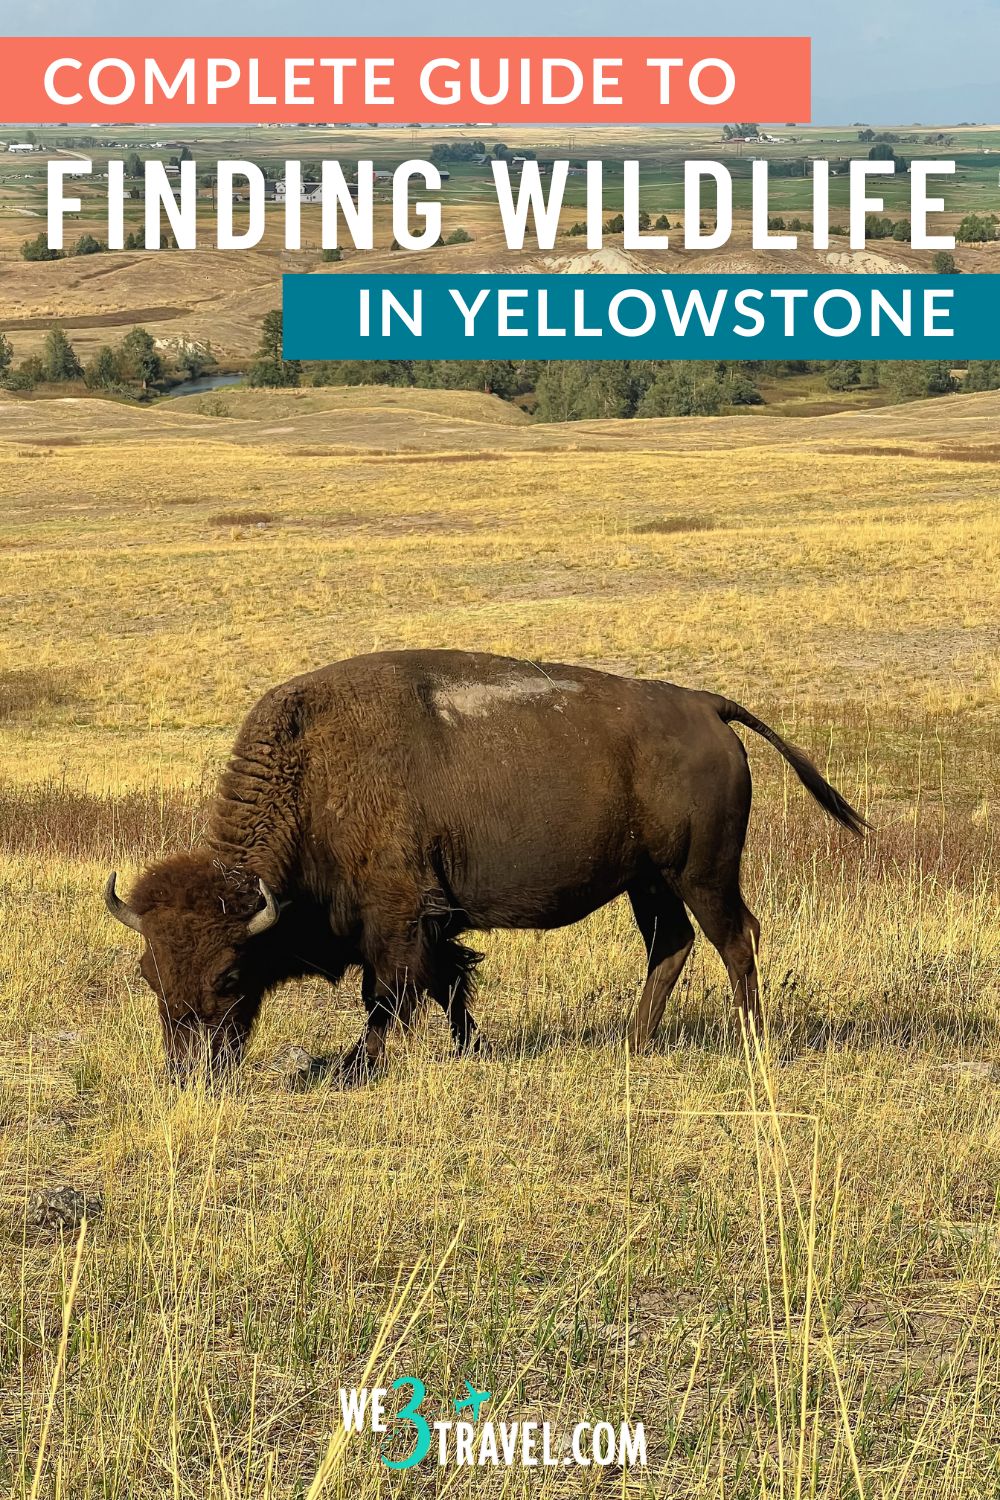 Complete guide to finding wildlife in Yellowstone National Park including bison, bears, and elk